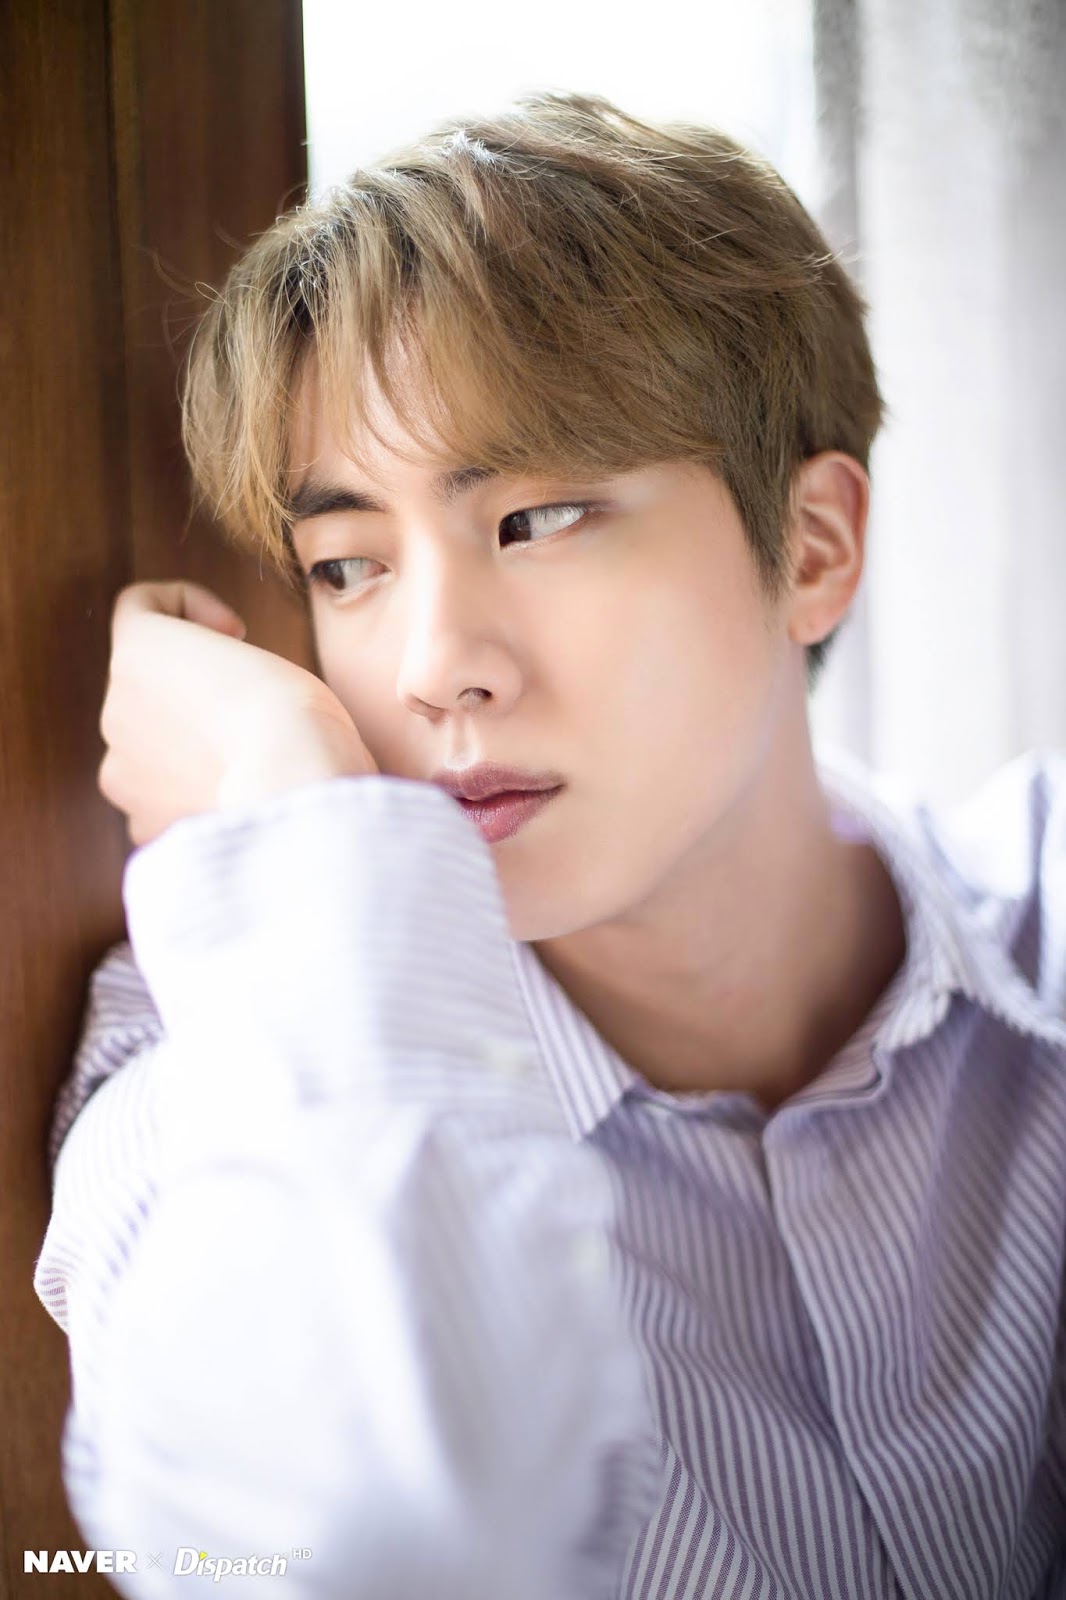 Naver x Dispatch: BTS White Day Special Photoshoot — Solo Shots